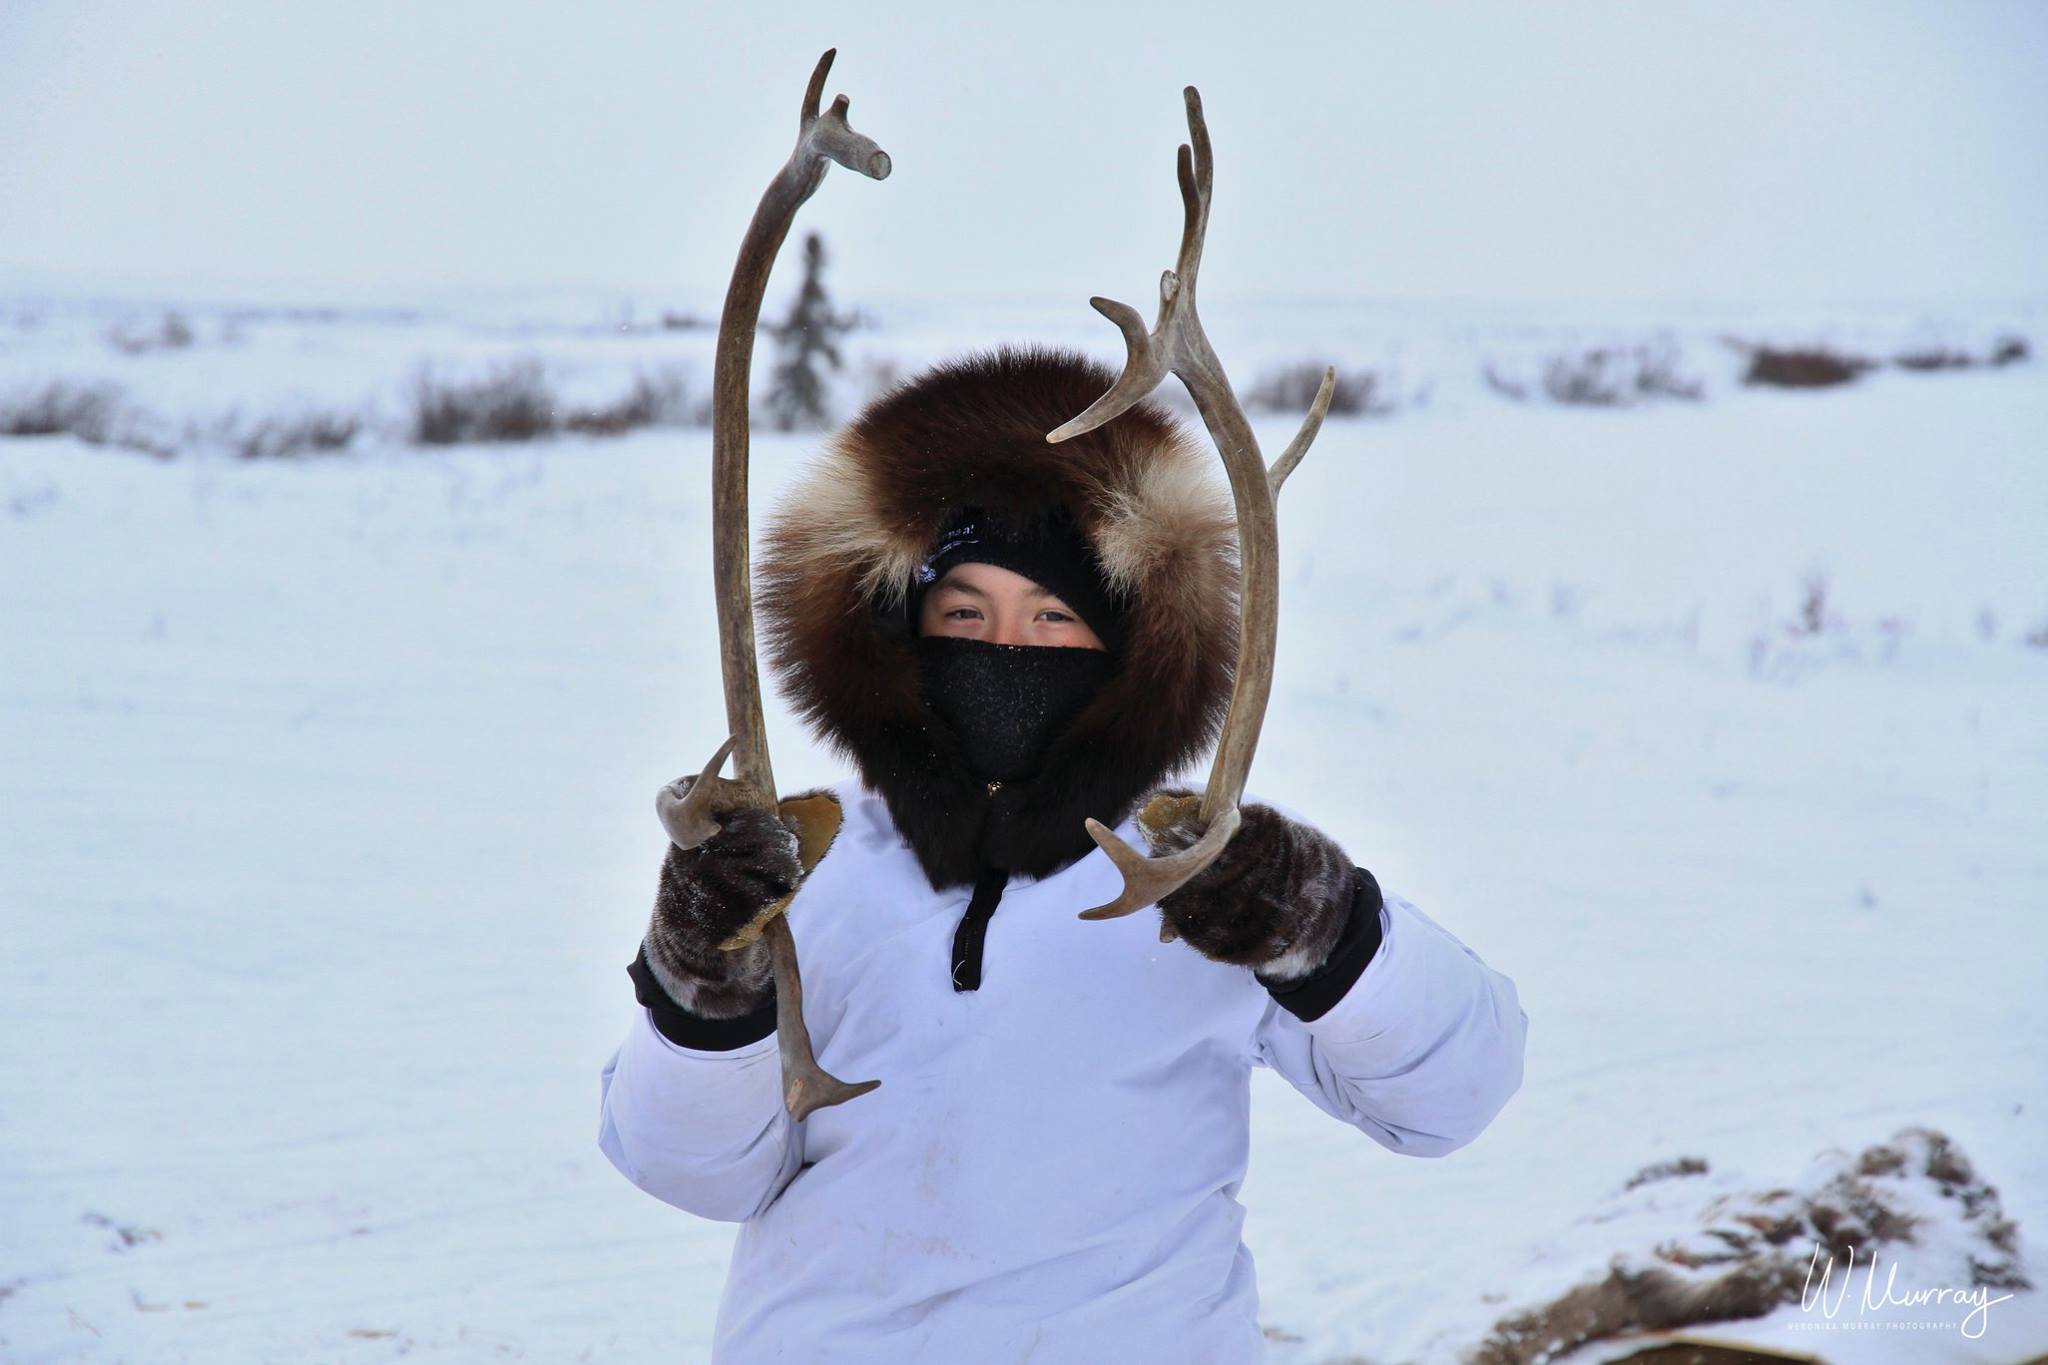 A young boy showing us the antlers of the caribou he hunted